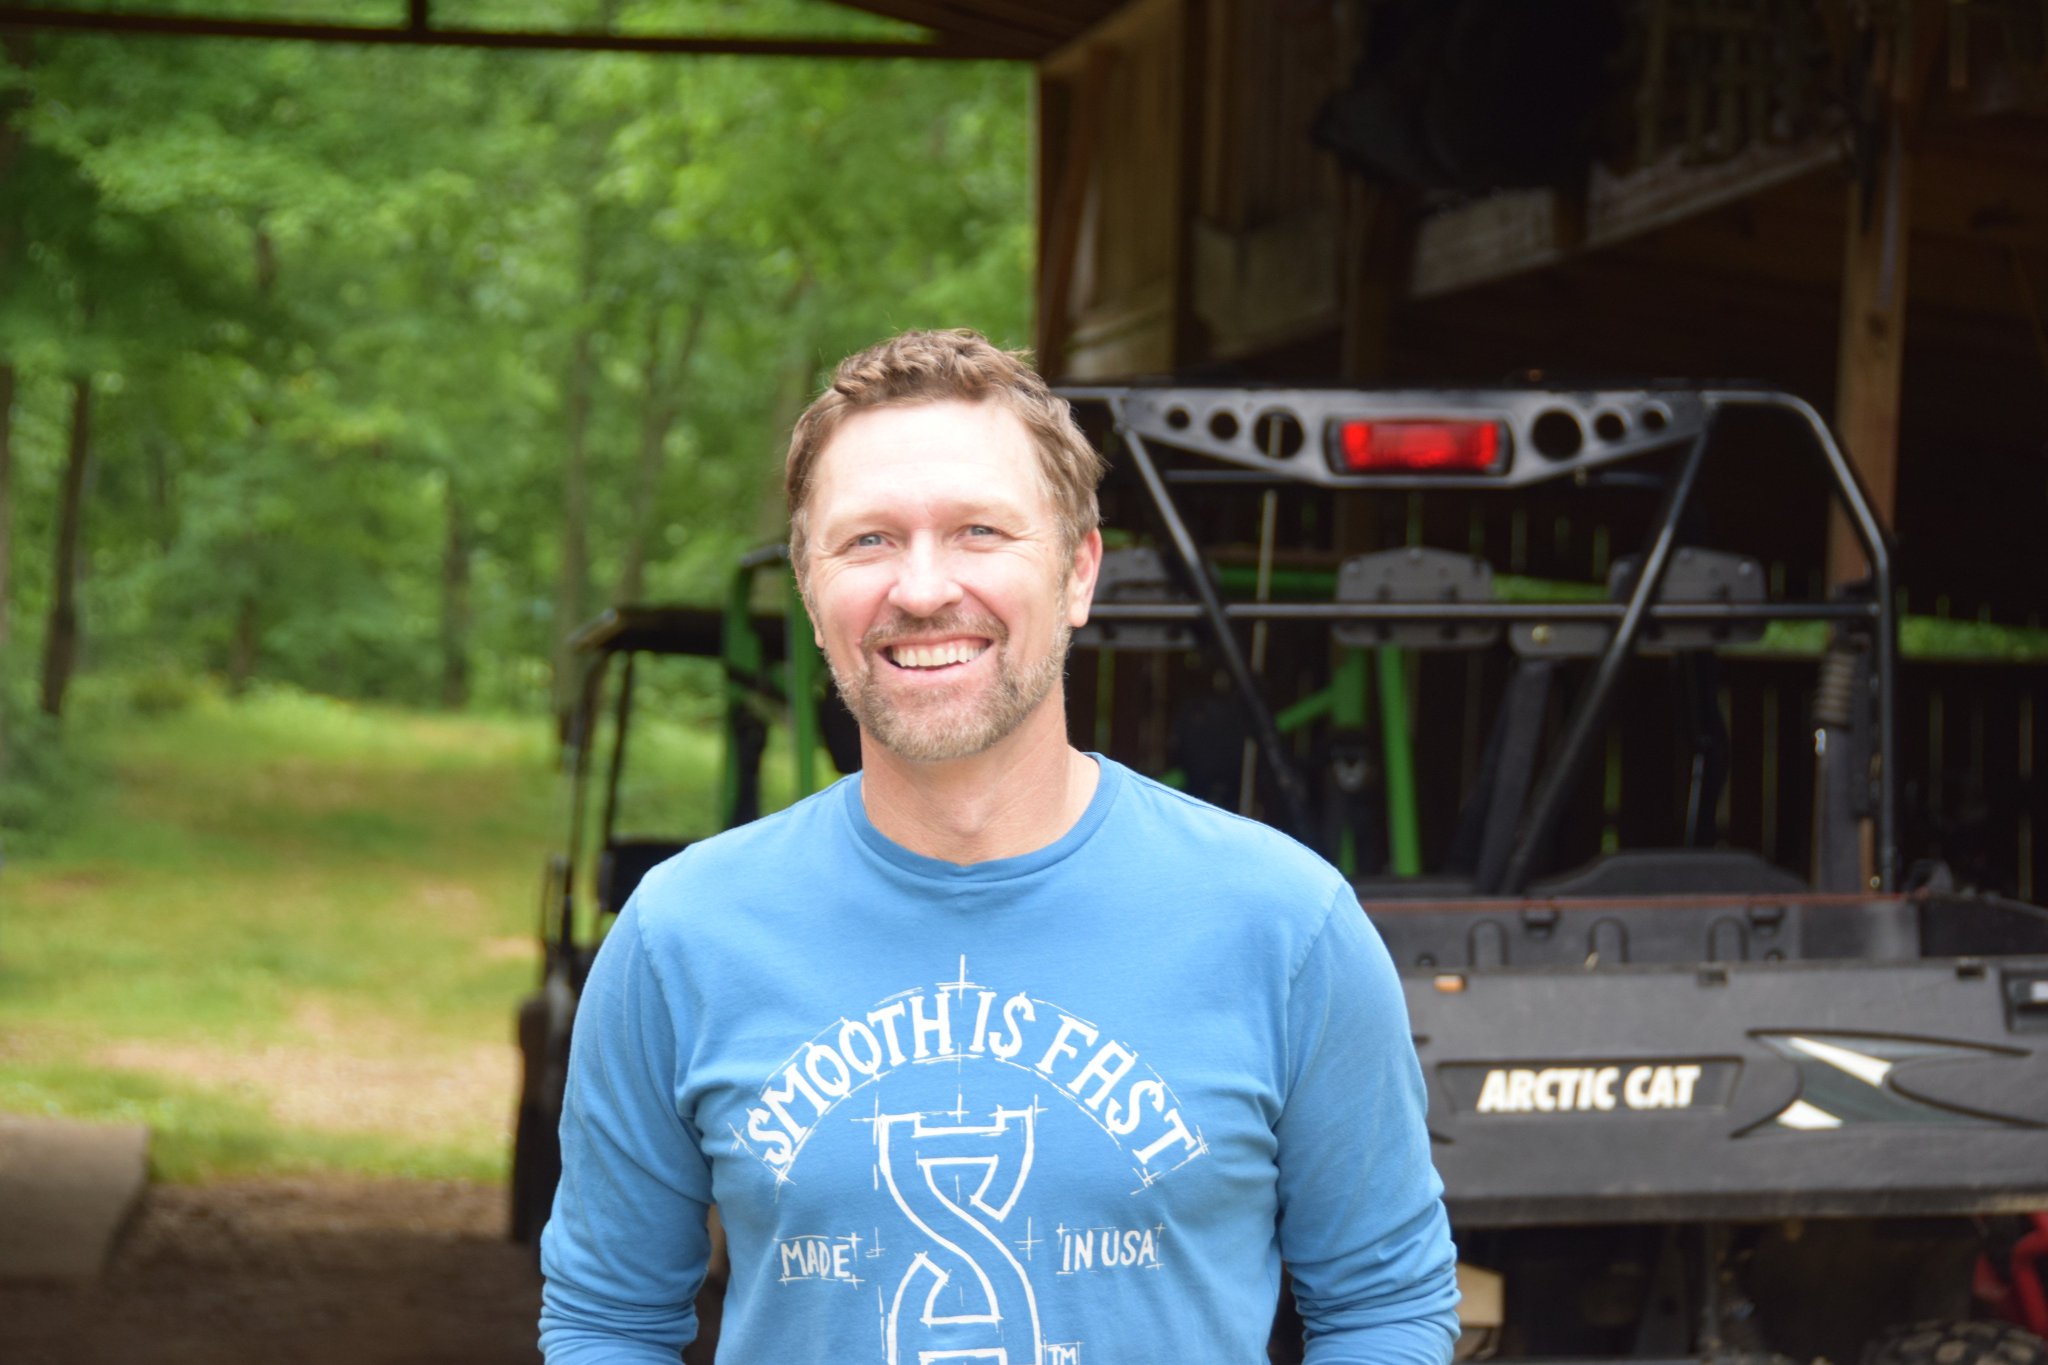 Happy birthday to the most energetic 53-year-old on the planet, Craig Morgan, 